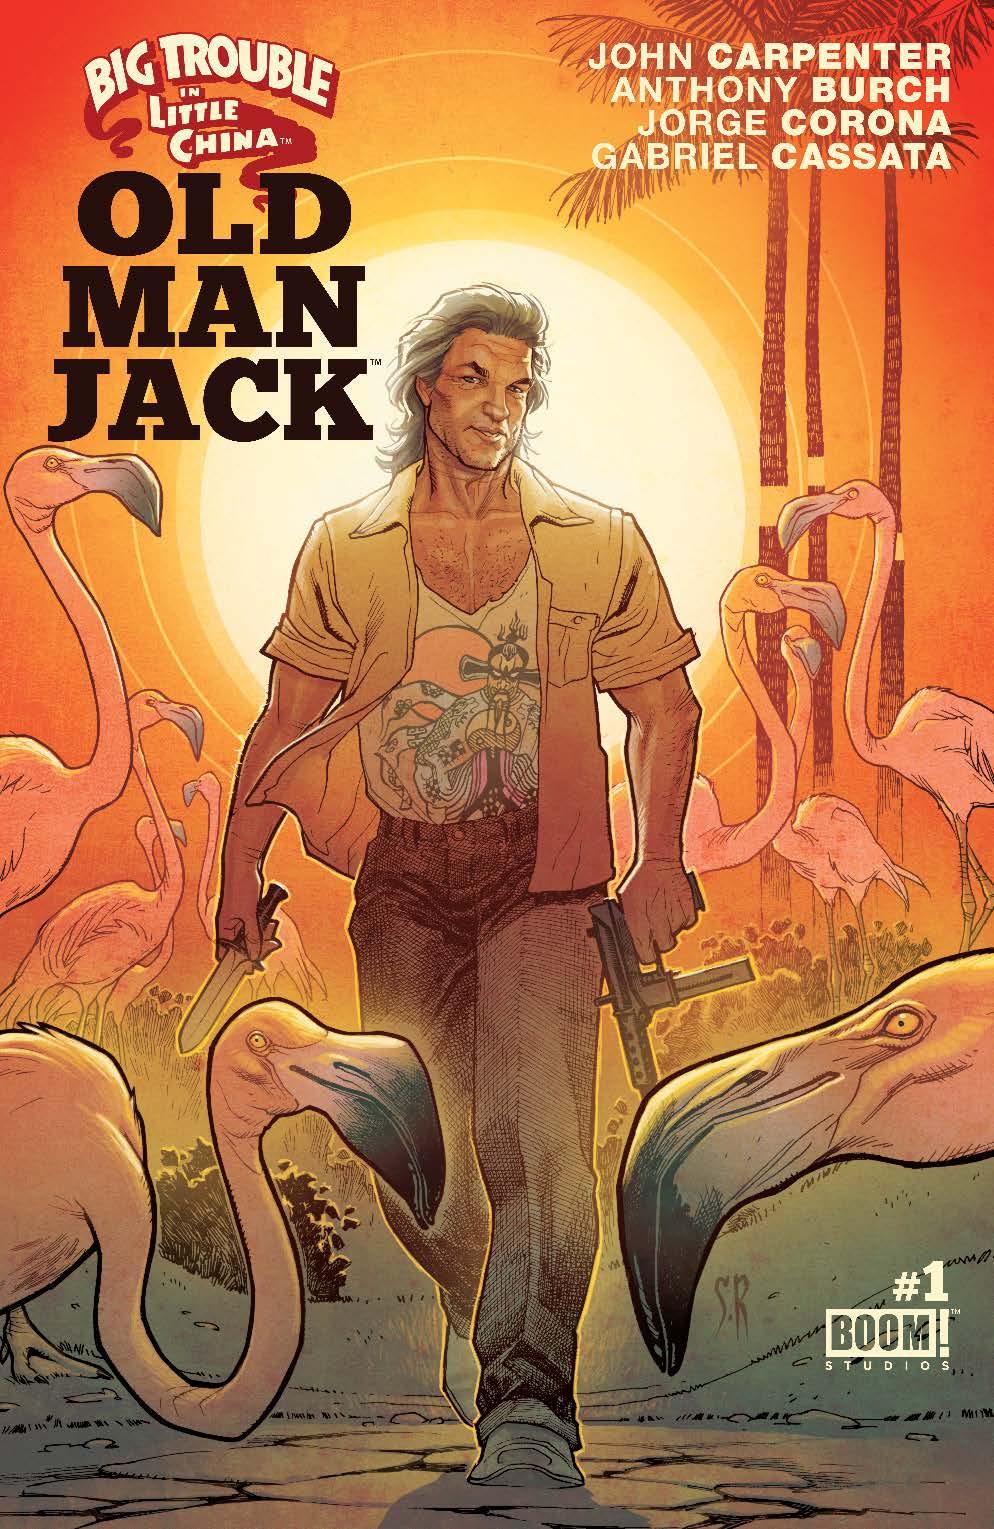 Big Trouble In Little China Old Man Jack Vol. 1 #1